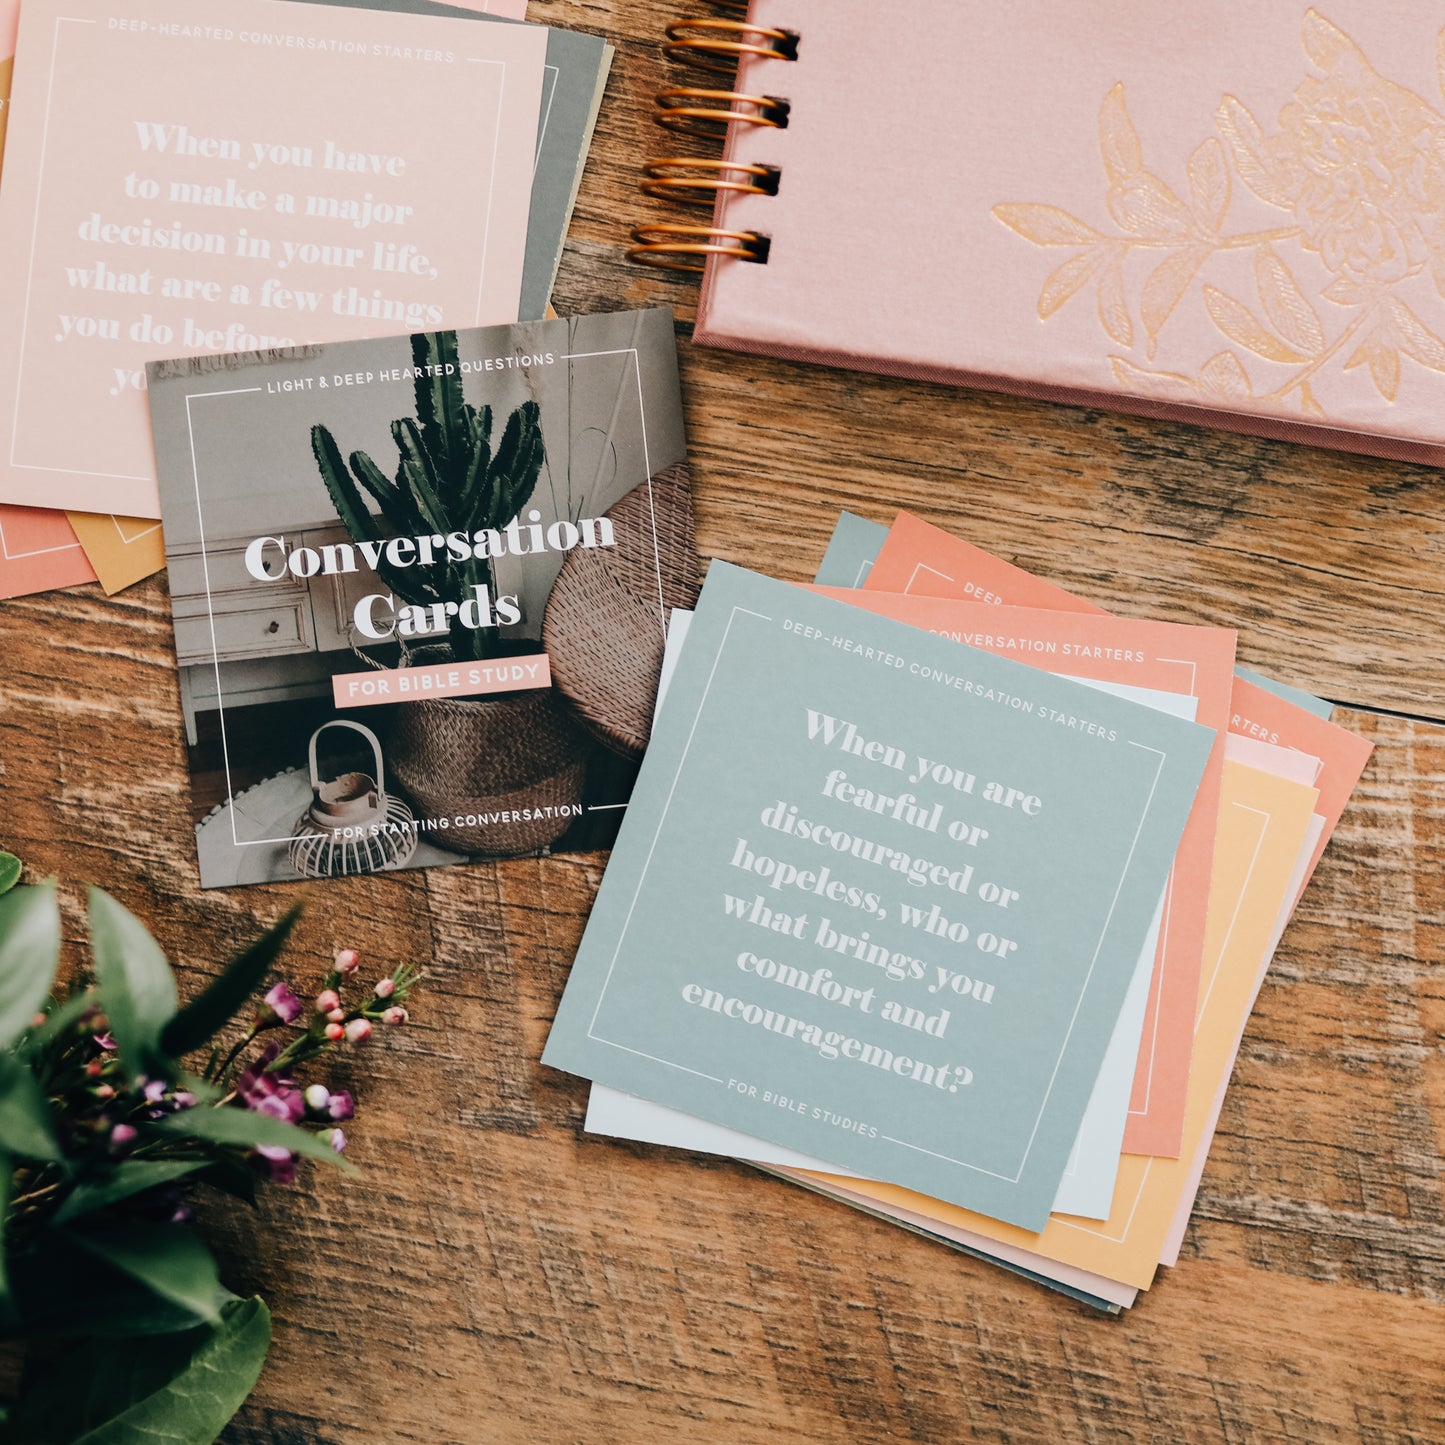 Conversation Cards for Bible Study